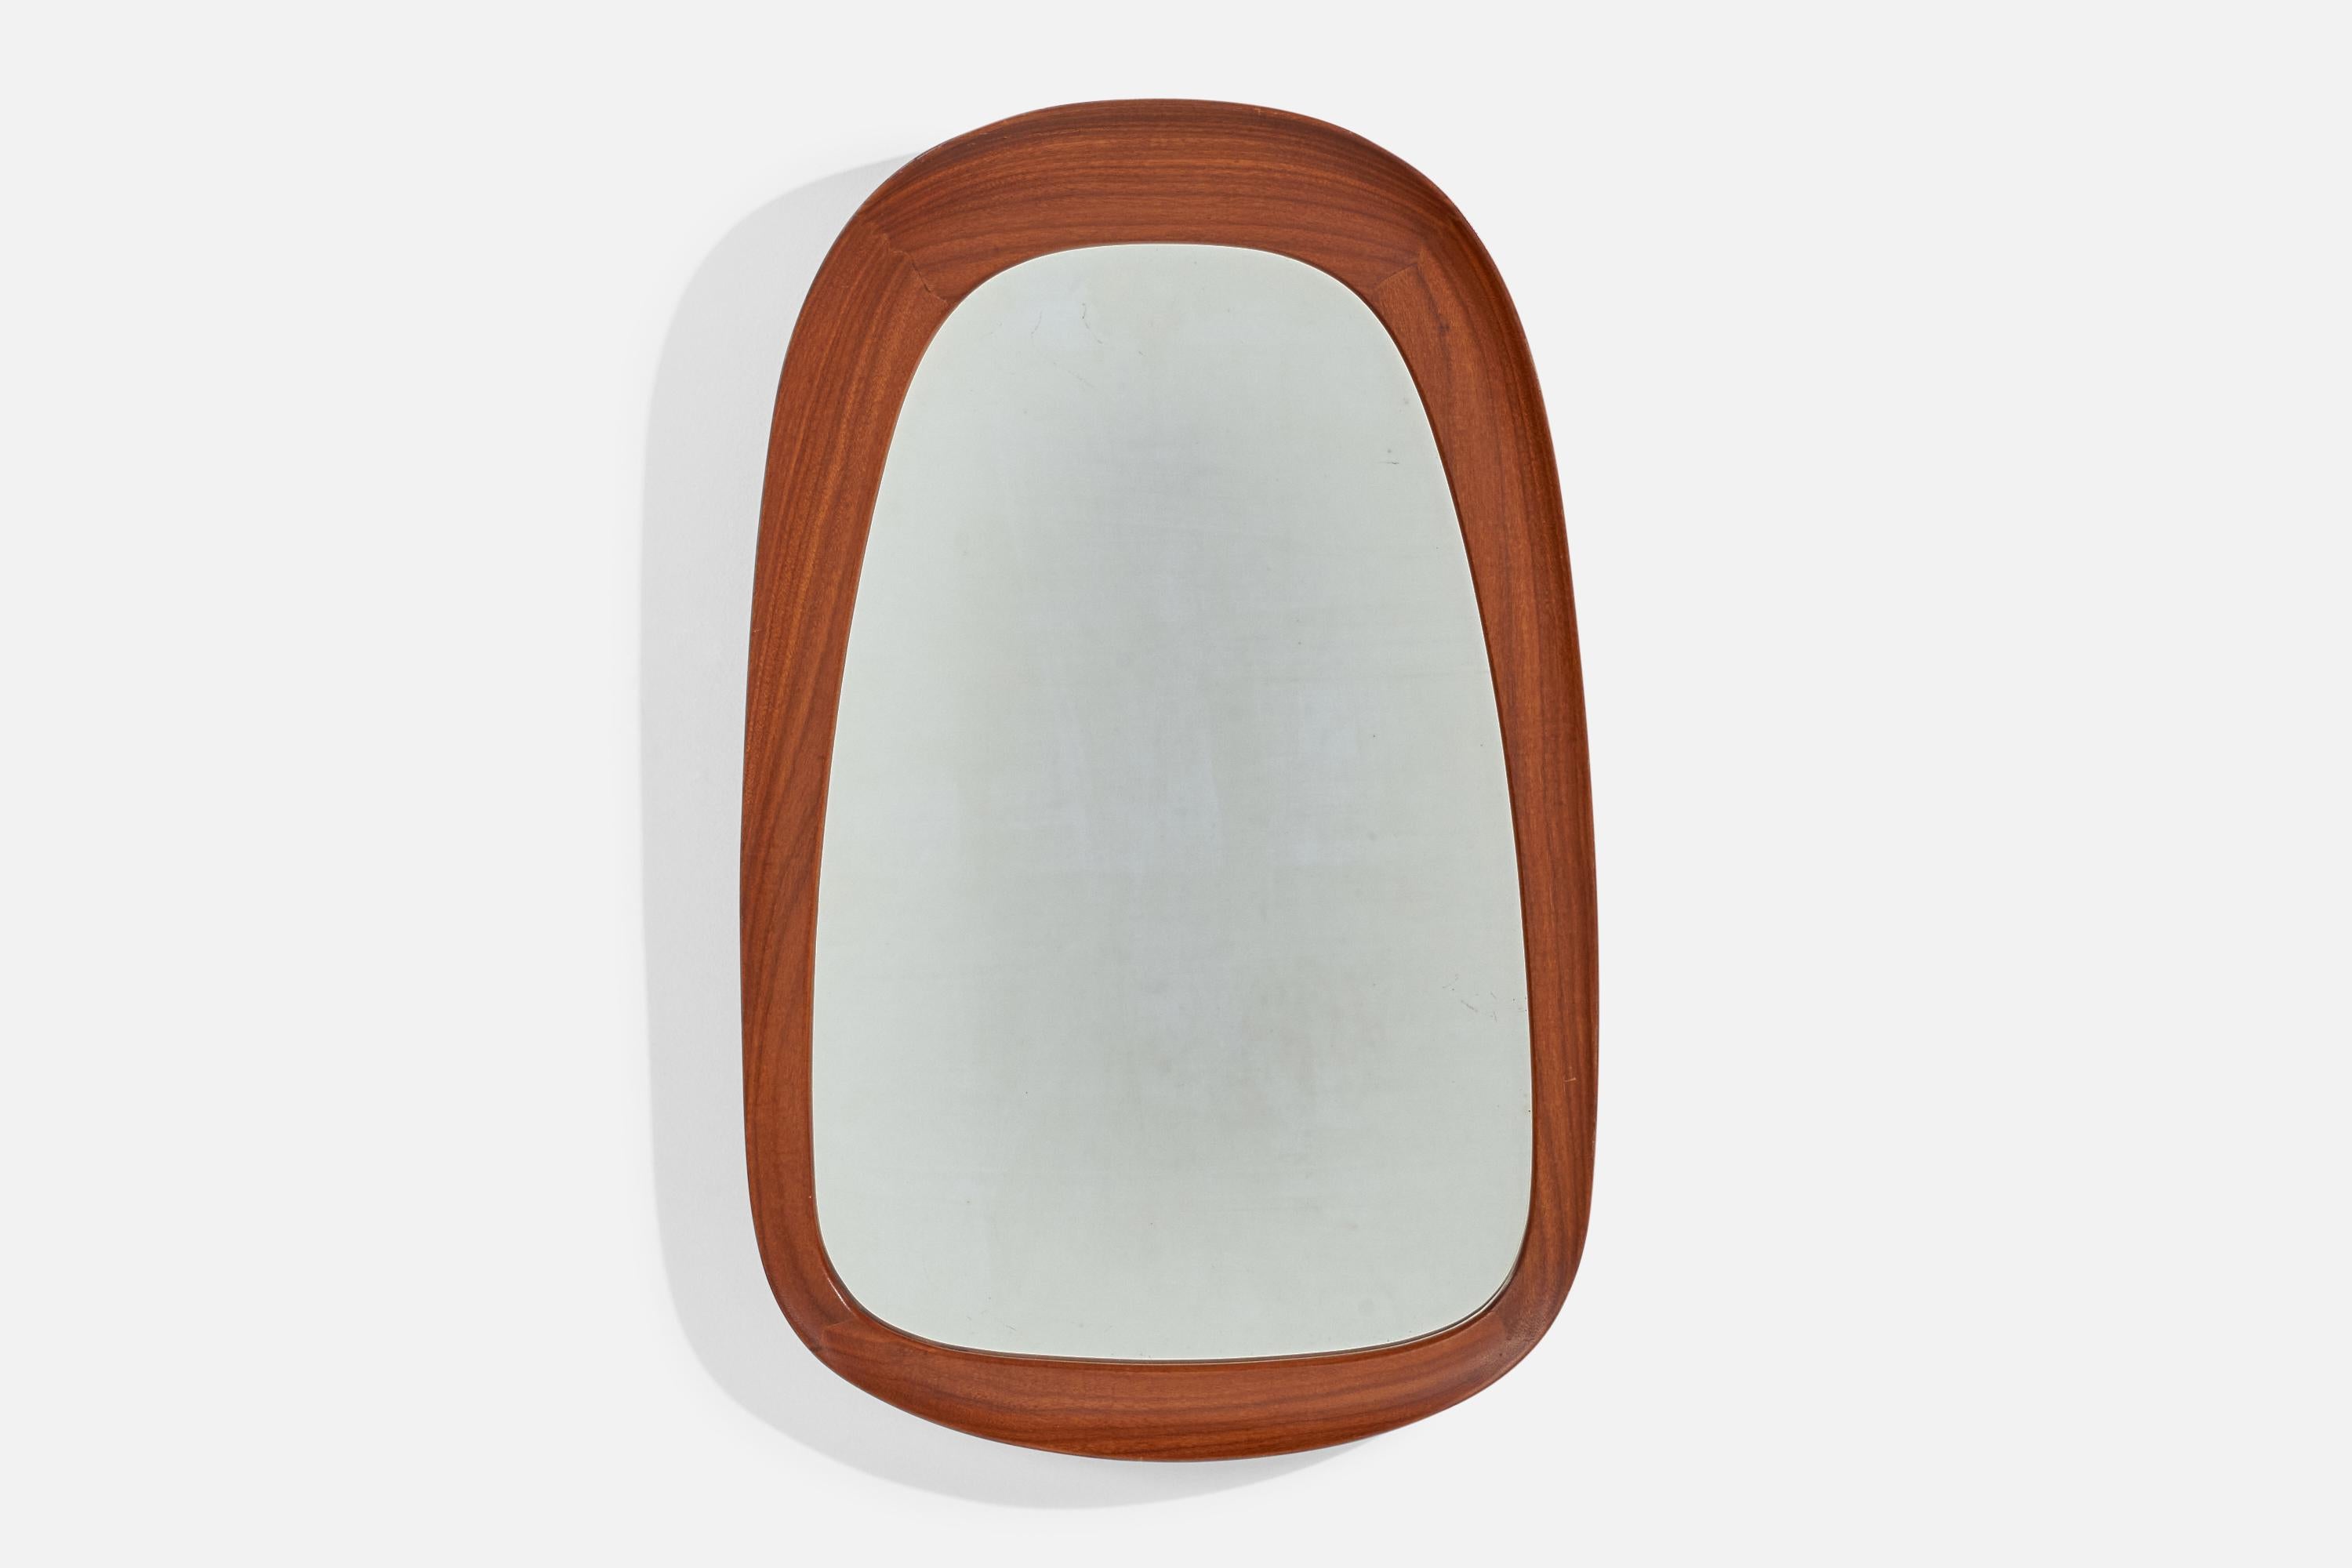 A solid teak wall mirror designed and produced Glas & Trä, Hovmantorp Sweden, 1950s-1960s.
 